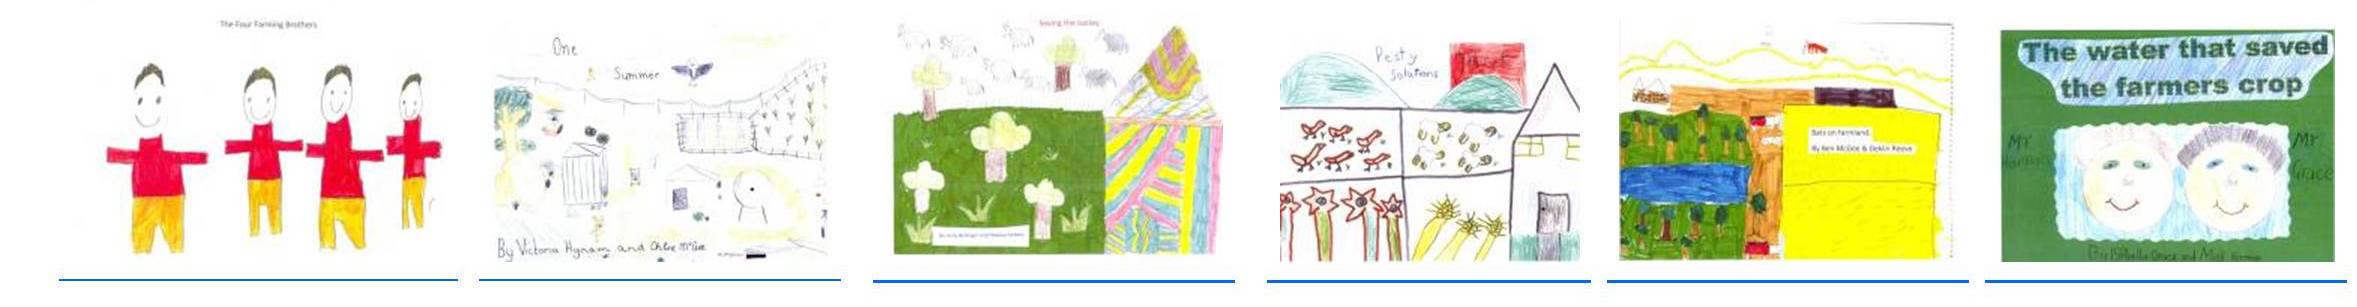 phto of covers of the 6 St Joseph's PS Hopetoun books on Sustainability issues in farming